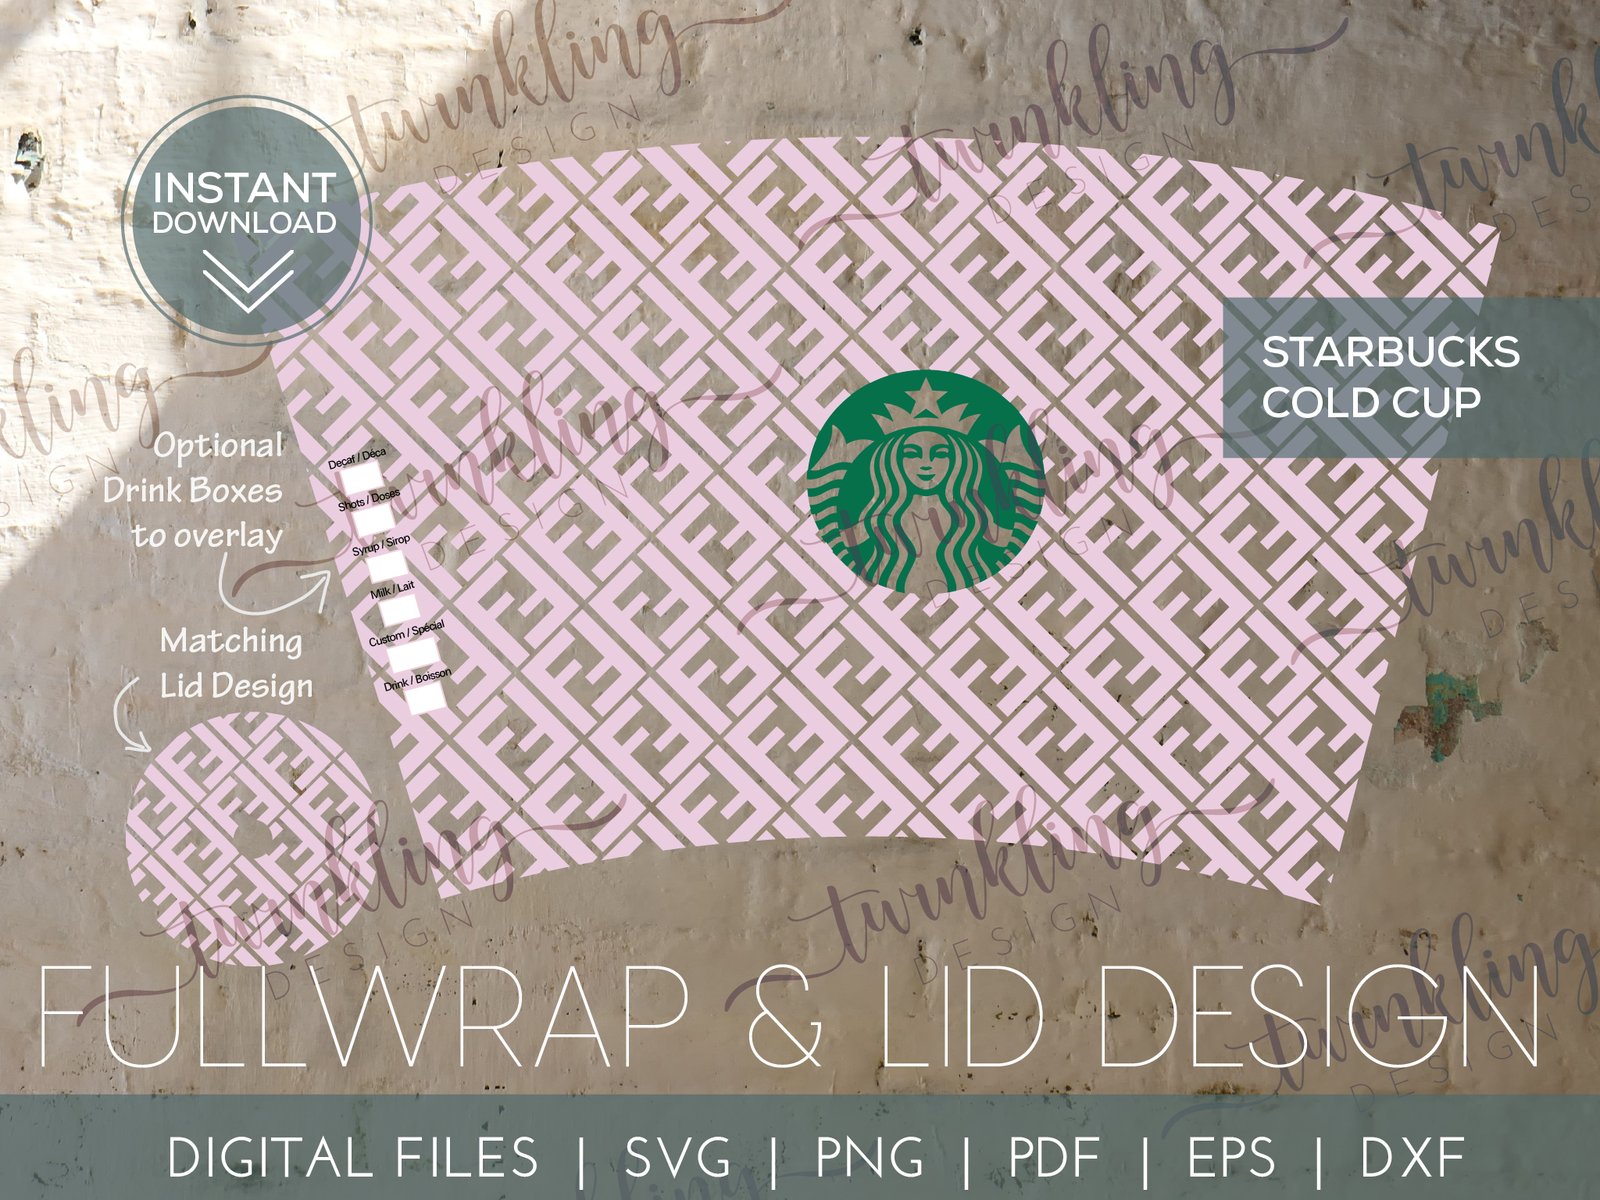 How to make a Custom Starbucks Wrap with free template 